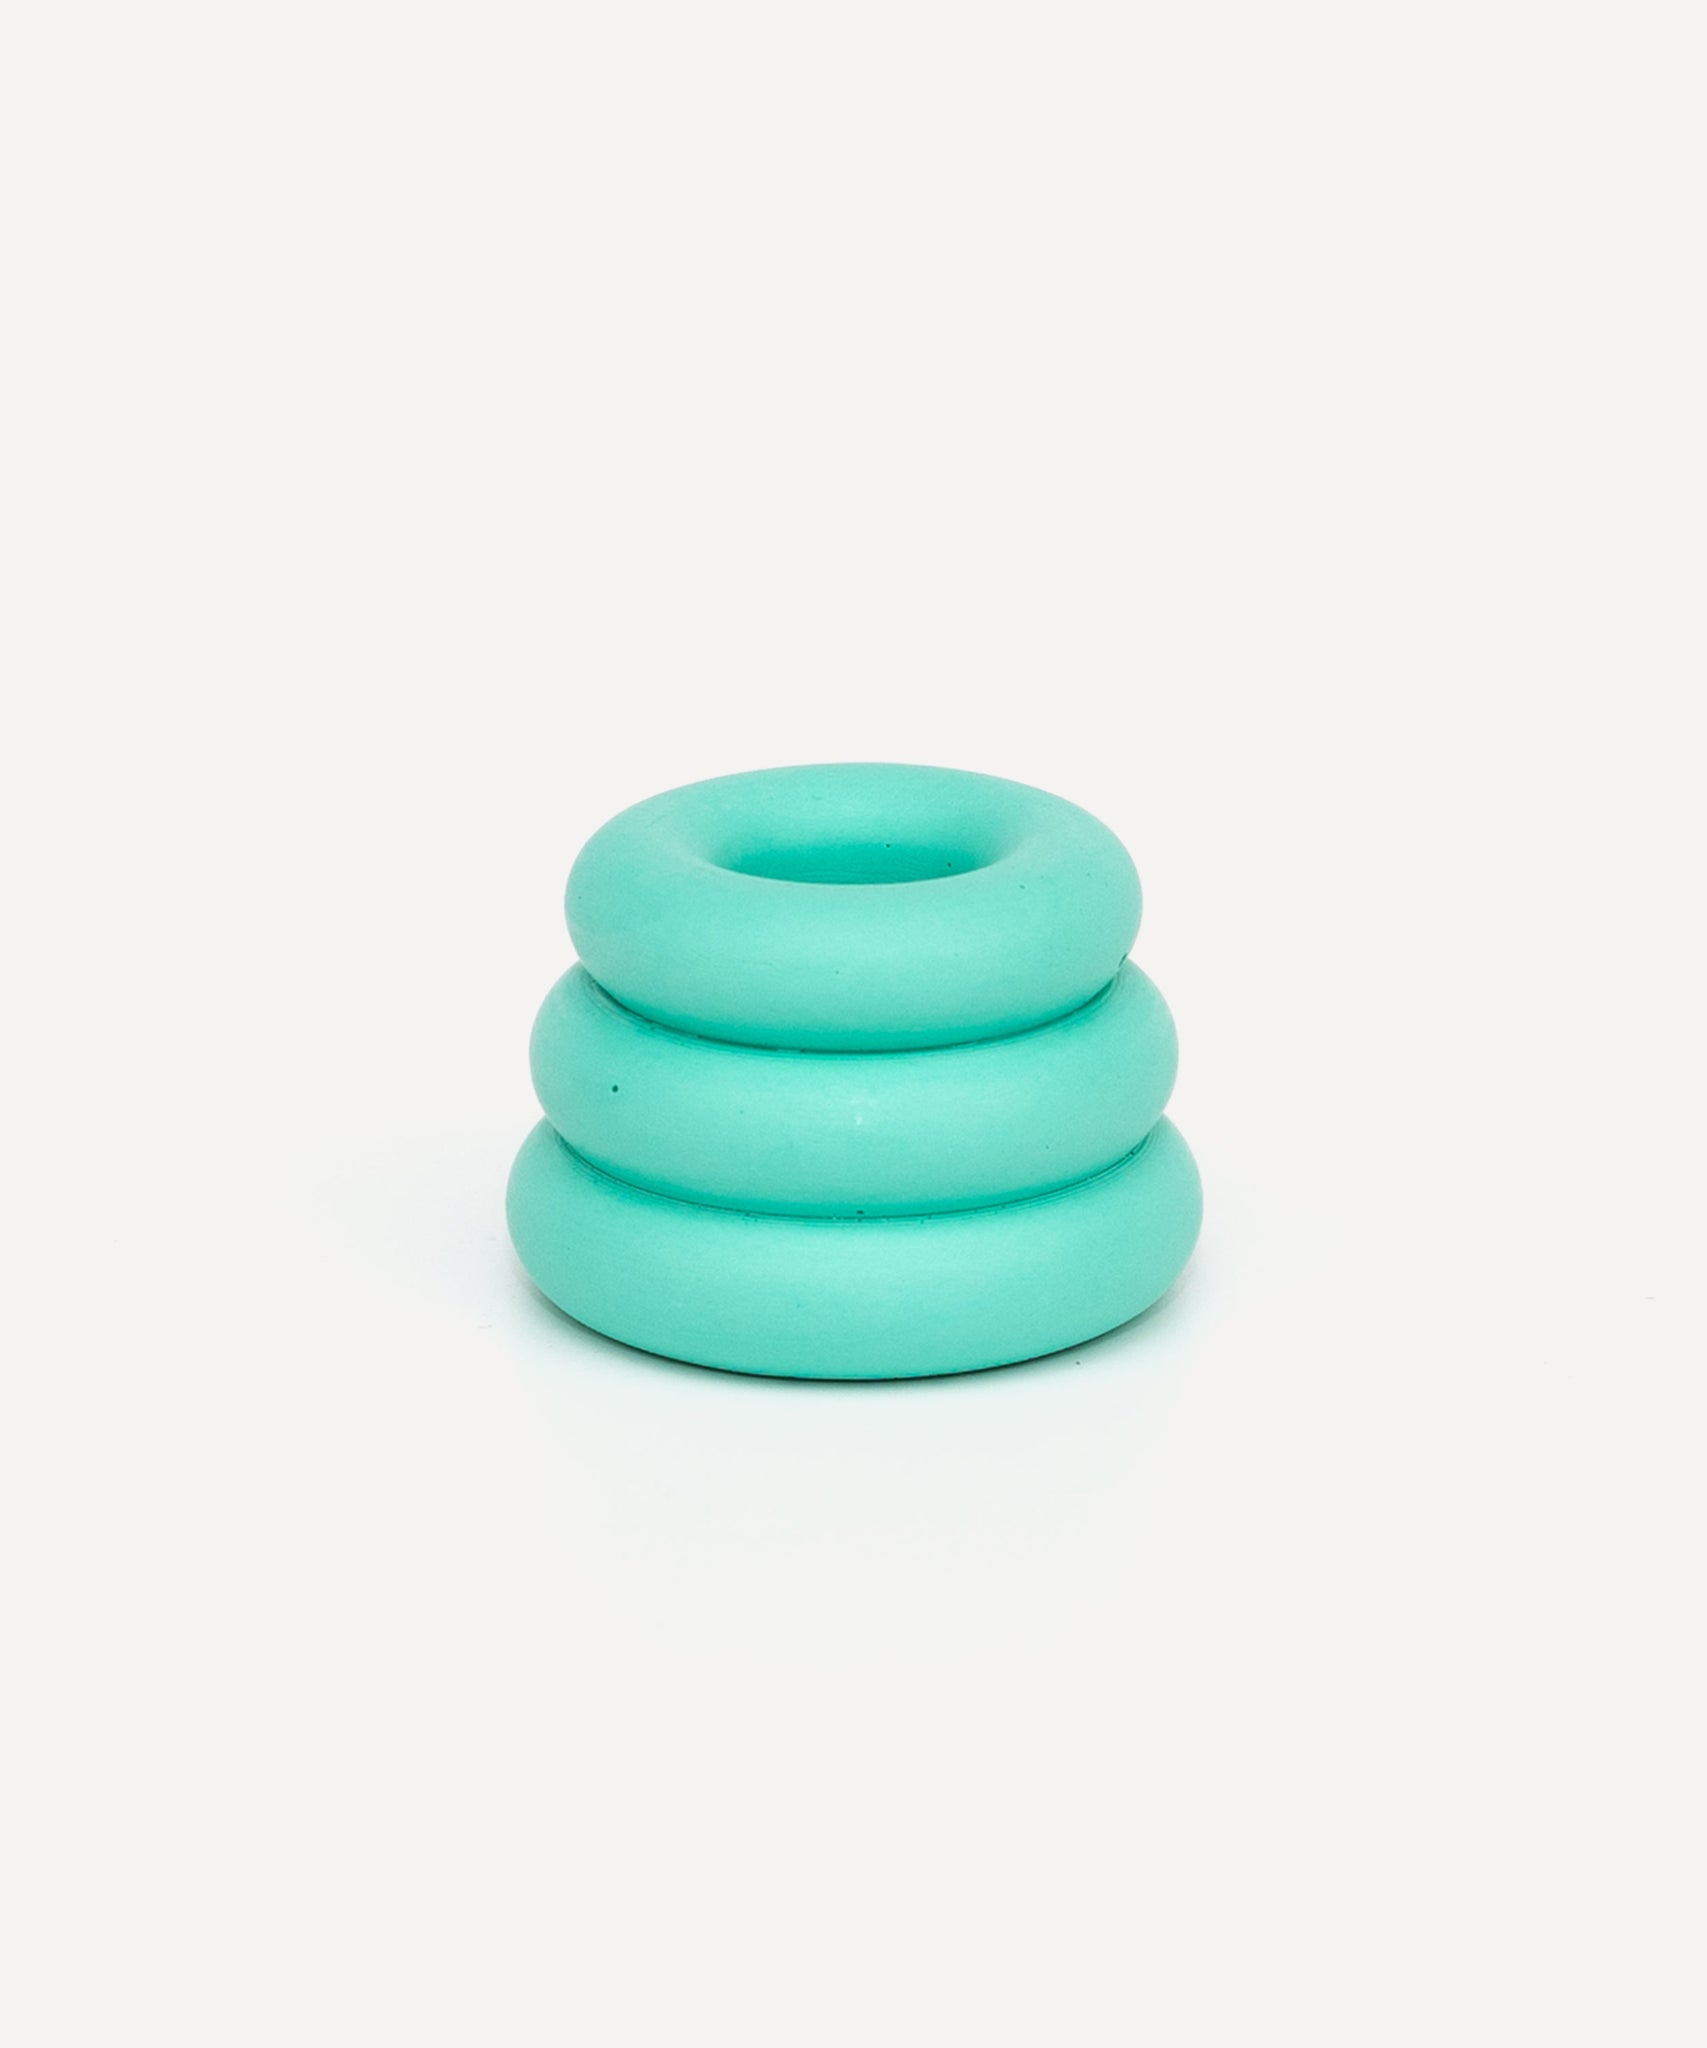 Mint Green Jesmonite Candleholder by Yod and Co